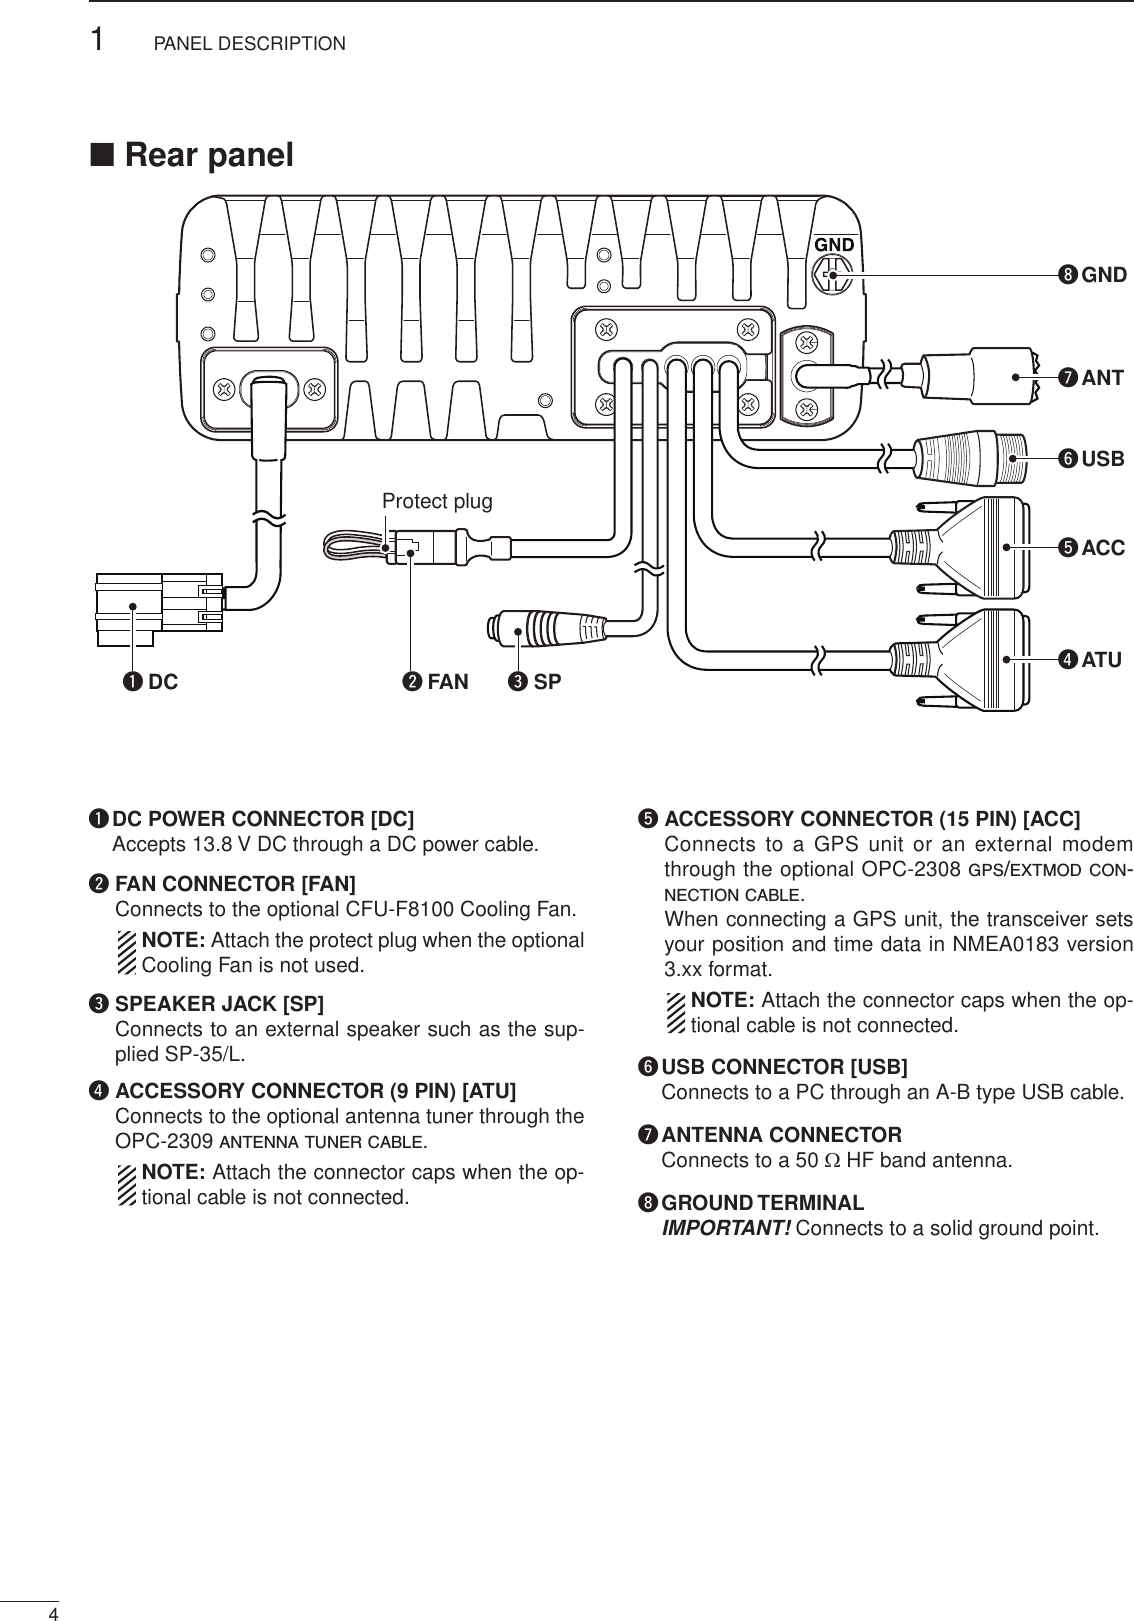 41PANEL DESCRIPTION2001 NEW 2001 NEWq DC POWER CONNECTOR [DC]   Accepts 13.8 V DC through a DC power cable.w FAN CONNECTOR [FAN]   Connects to the optional CFU-F8100 Cooling Fan.   NOTE: Attach the protect plug when the optional Cooling Fan is not used.e SPEAKER JACK [SP]   Connects to an external speaker such as the sup-plied SP-35/L.r  ACCESSORY CONNECTOR (9 PIN) [ATU]    Connects to the optional antenna tuner through the OPC-2309 a n t e n n a  t u n e r  c a b l e .   NOTE: Attach the connector caps when the op-tional cable is not connected.t  ACCESSORY CONNECTOR (15 PIN) [ACC]    Connects to a GPS unit or an external modem through the optional OPC-2308 gps/extmod con-n e c t i o n  c a b l e .   When connecting a GPS unit, the transceiver sets your position and time data in NMEA0183 version 3.xx format.   NOTE: Attach the connector caps when the op-tional cable is not connected.y USB CONNECTOR [USB]   Connects to a PC through an A-B type USB cable.u ANTENNA CONNECTOR   Connects to a 50 Ω HF band antenna.i GROUND TERMINAL   IMPORTANT! Connects to a solid ground point.USBACCGNDANTuytATUriDCqFANProtect plugwSPe■ Rear panel